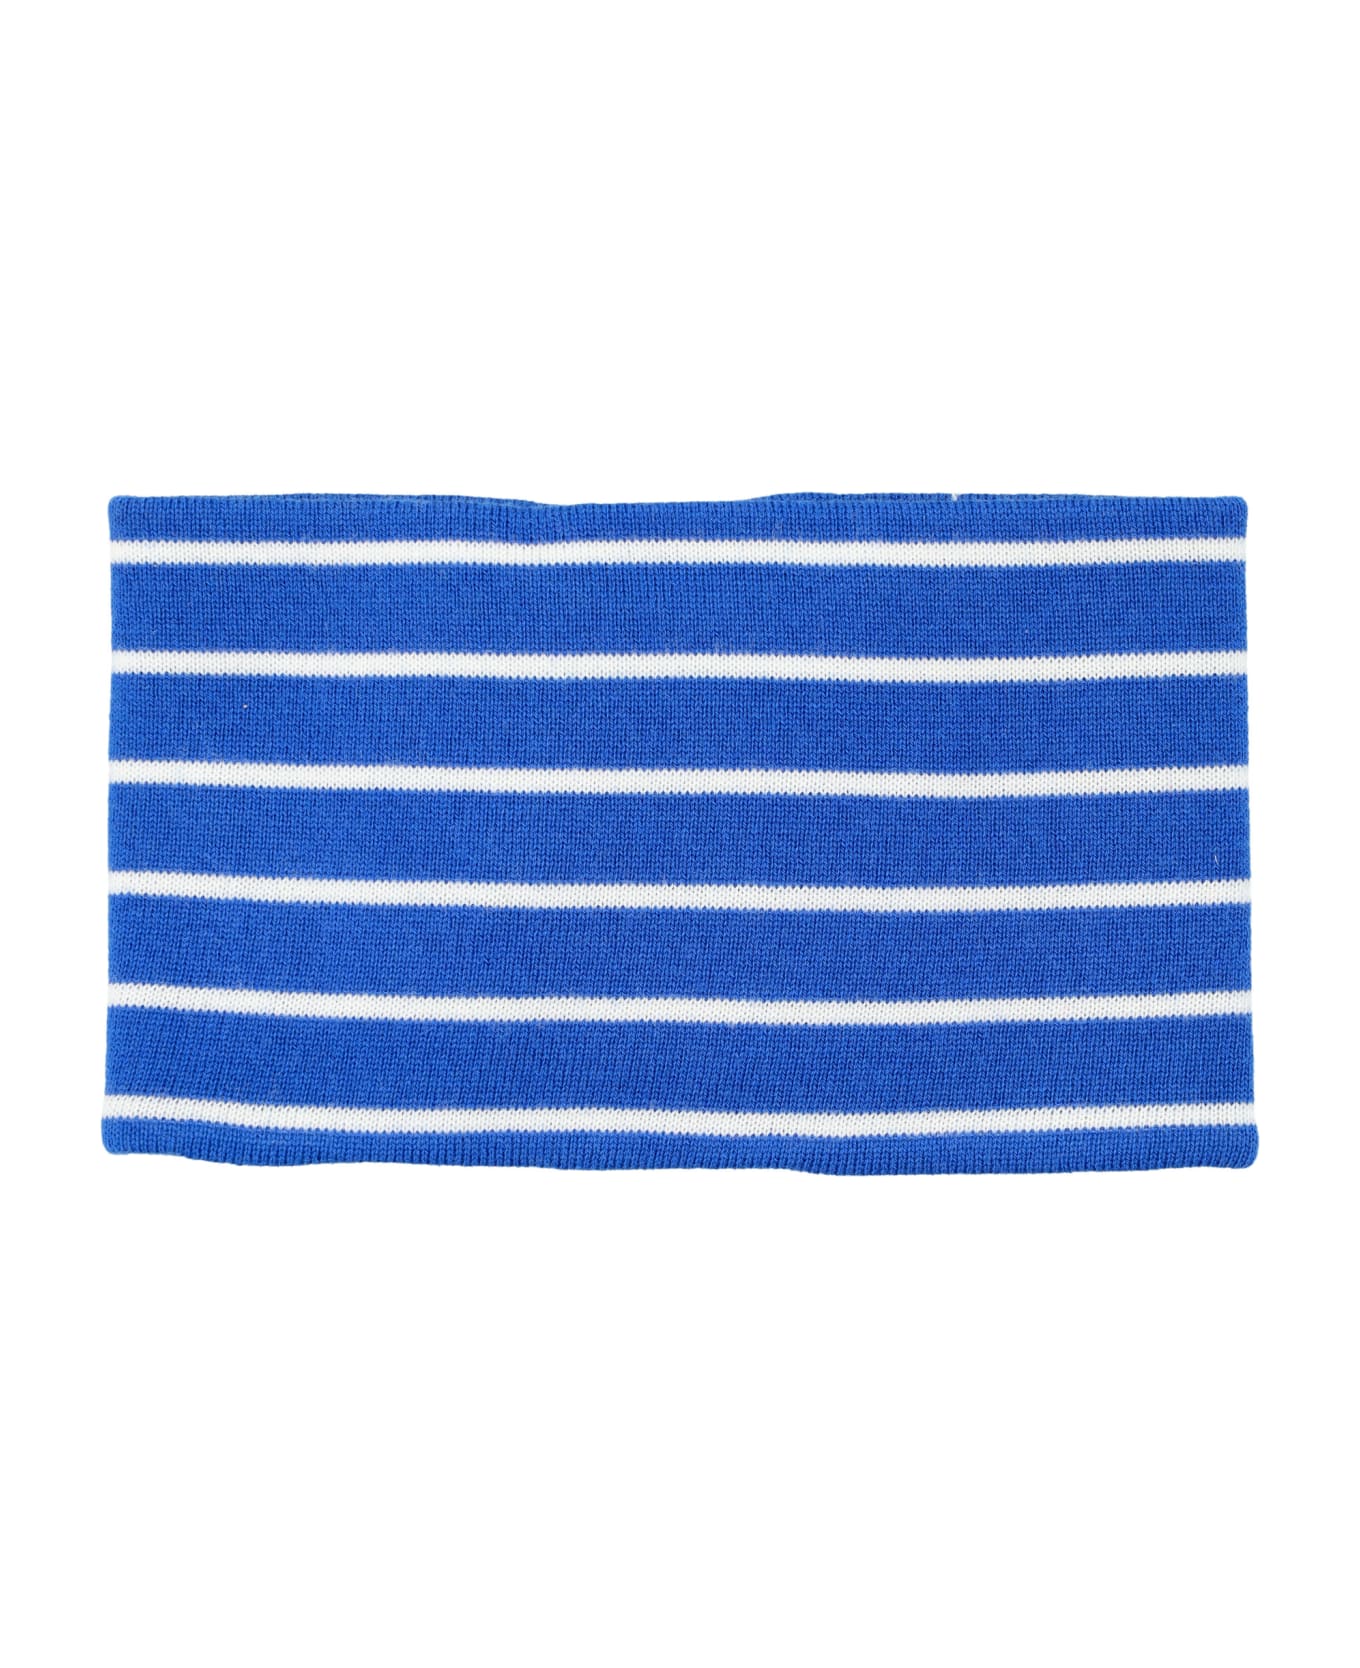 J.W. Anderson Striped Anchor Neckband - Azure blue